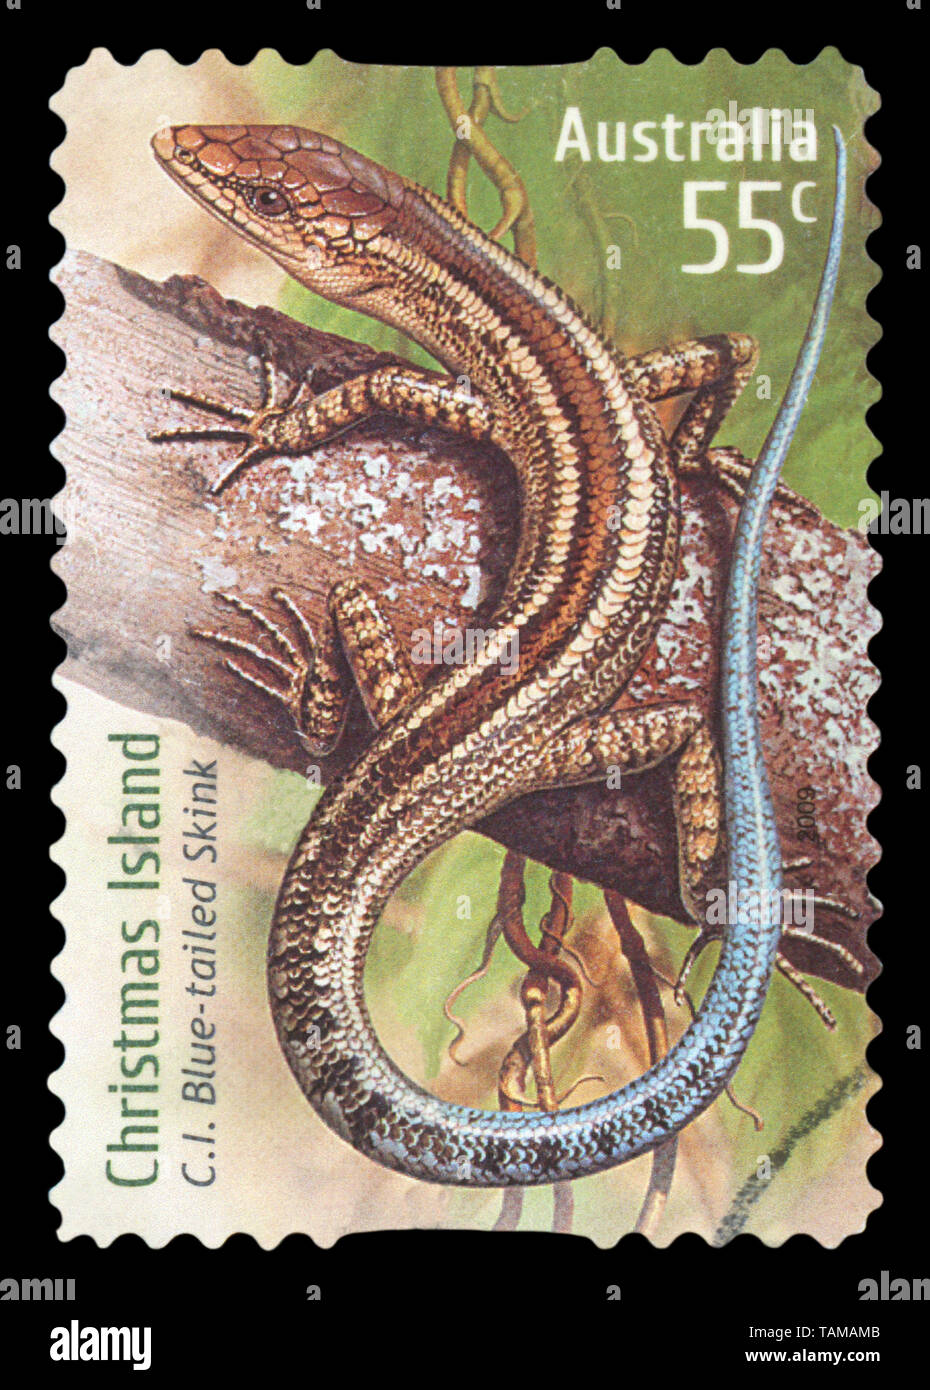 AUSTRALIA - CIRCA 2009: A stamp printed in Australia from the 'Christmas Island ' issue shows a C.I.Bblue-tailed Skink, circa 2009. Stock Photo